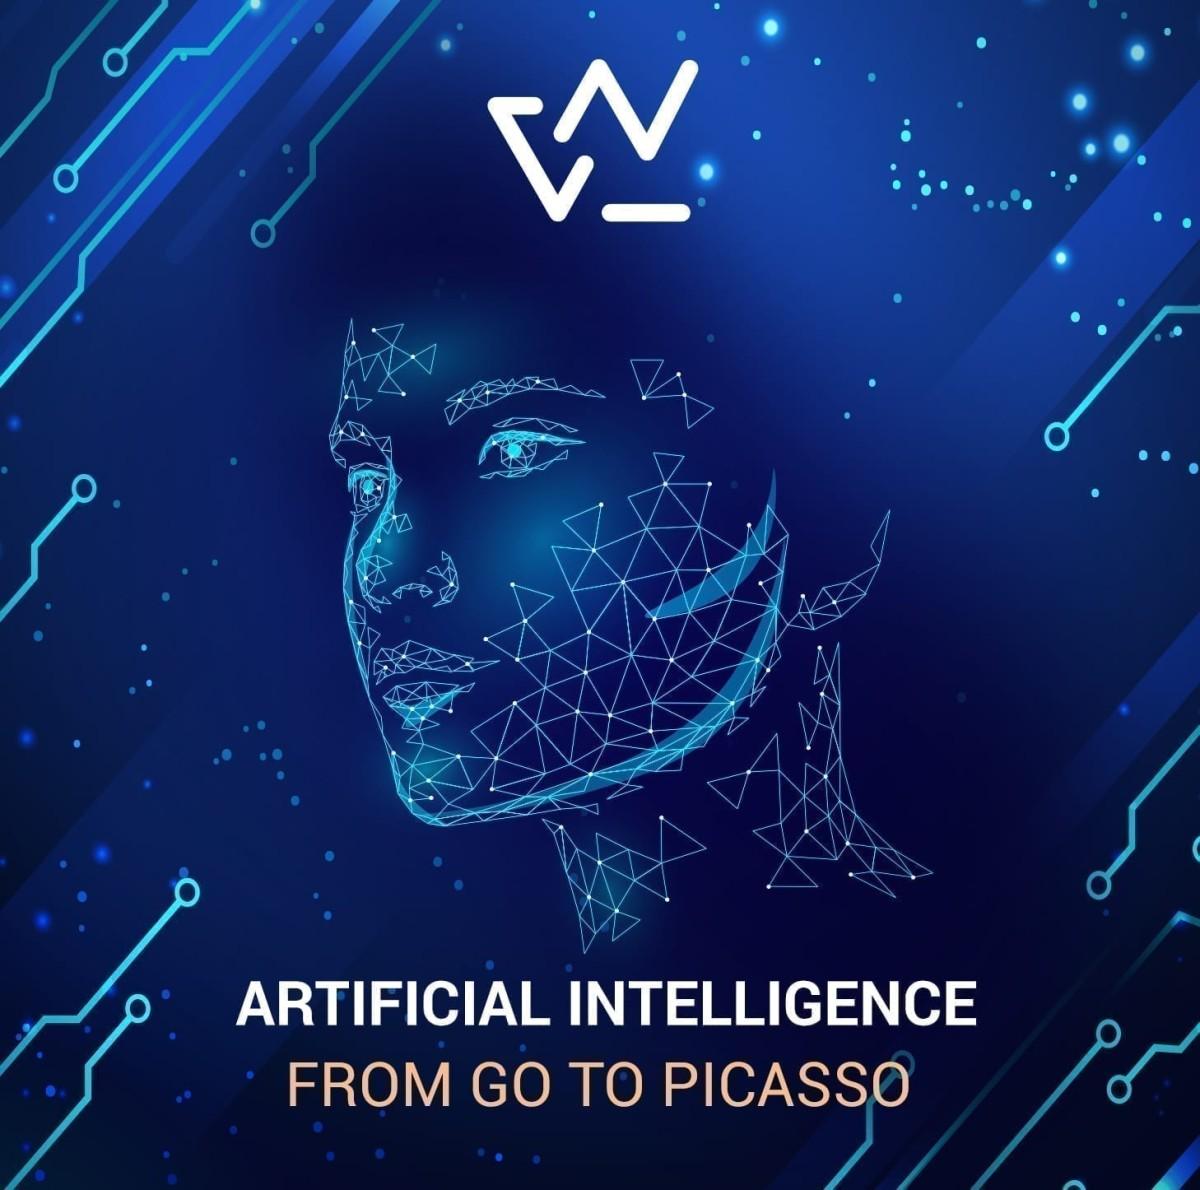 ARTIFICIAL INTELLIGENCE: FROM GO TO PICASSO